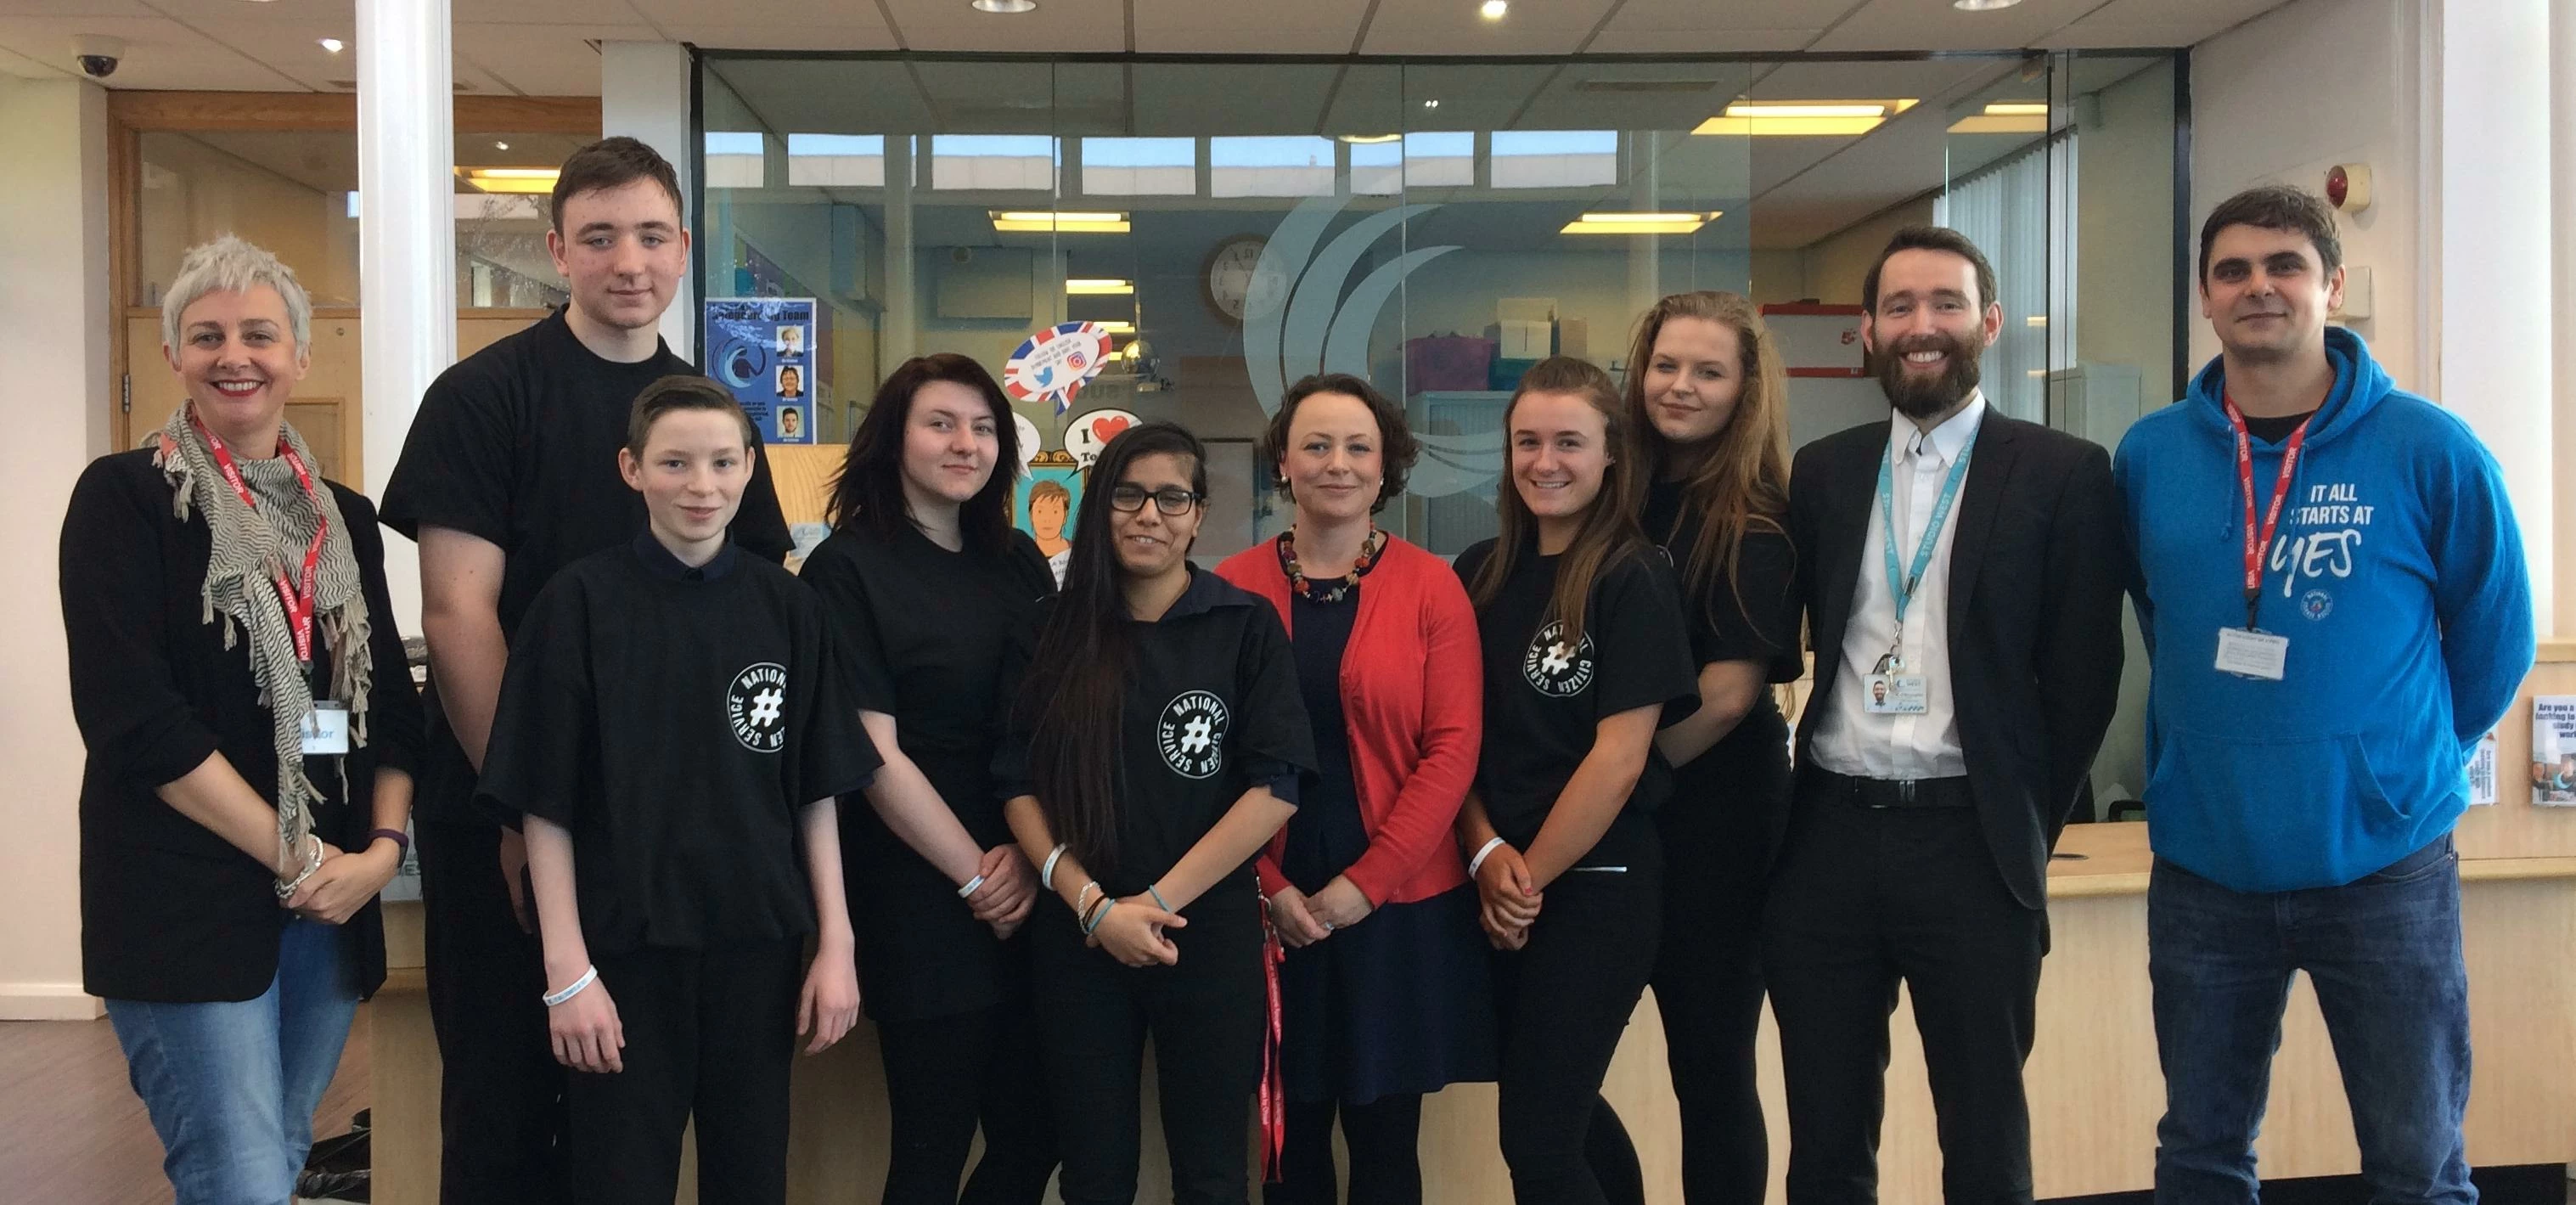 Teenage National Citizen Service (NCS) graduates met with Newcastle North MP Catherine McKinnell at 